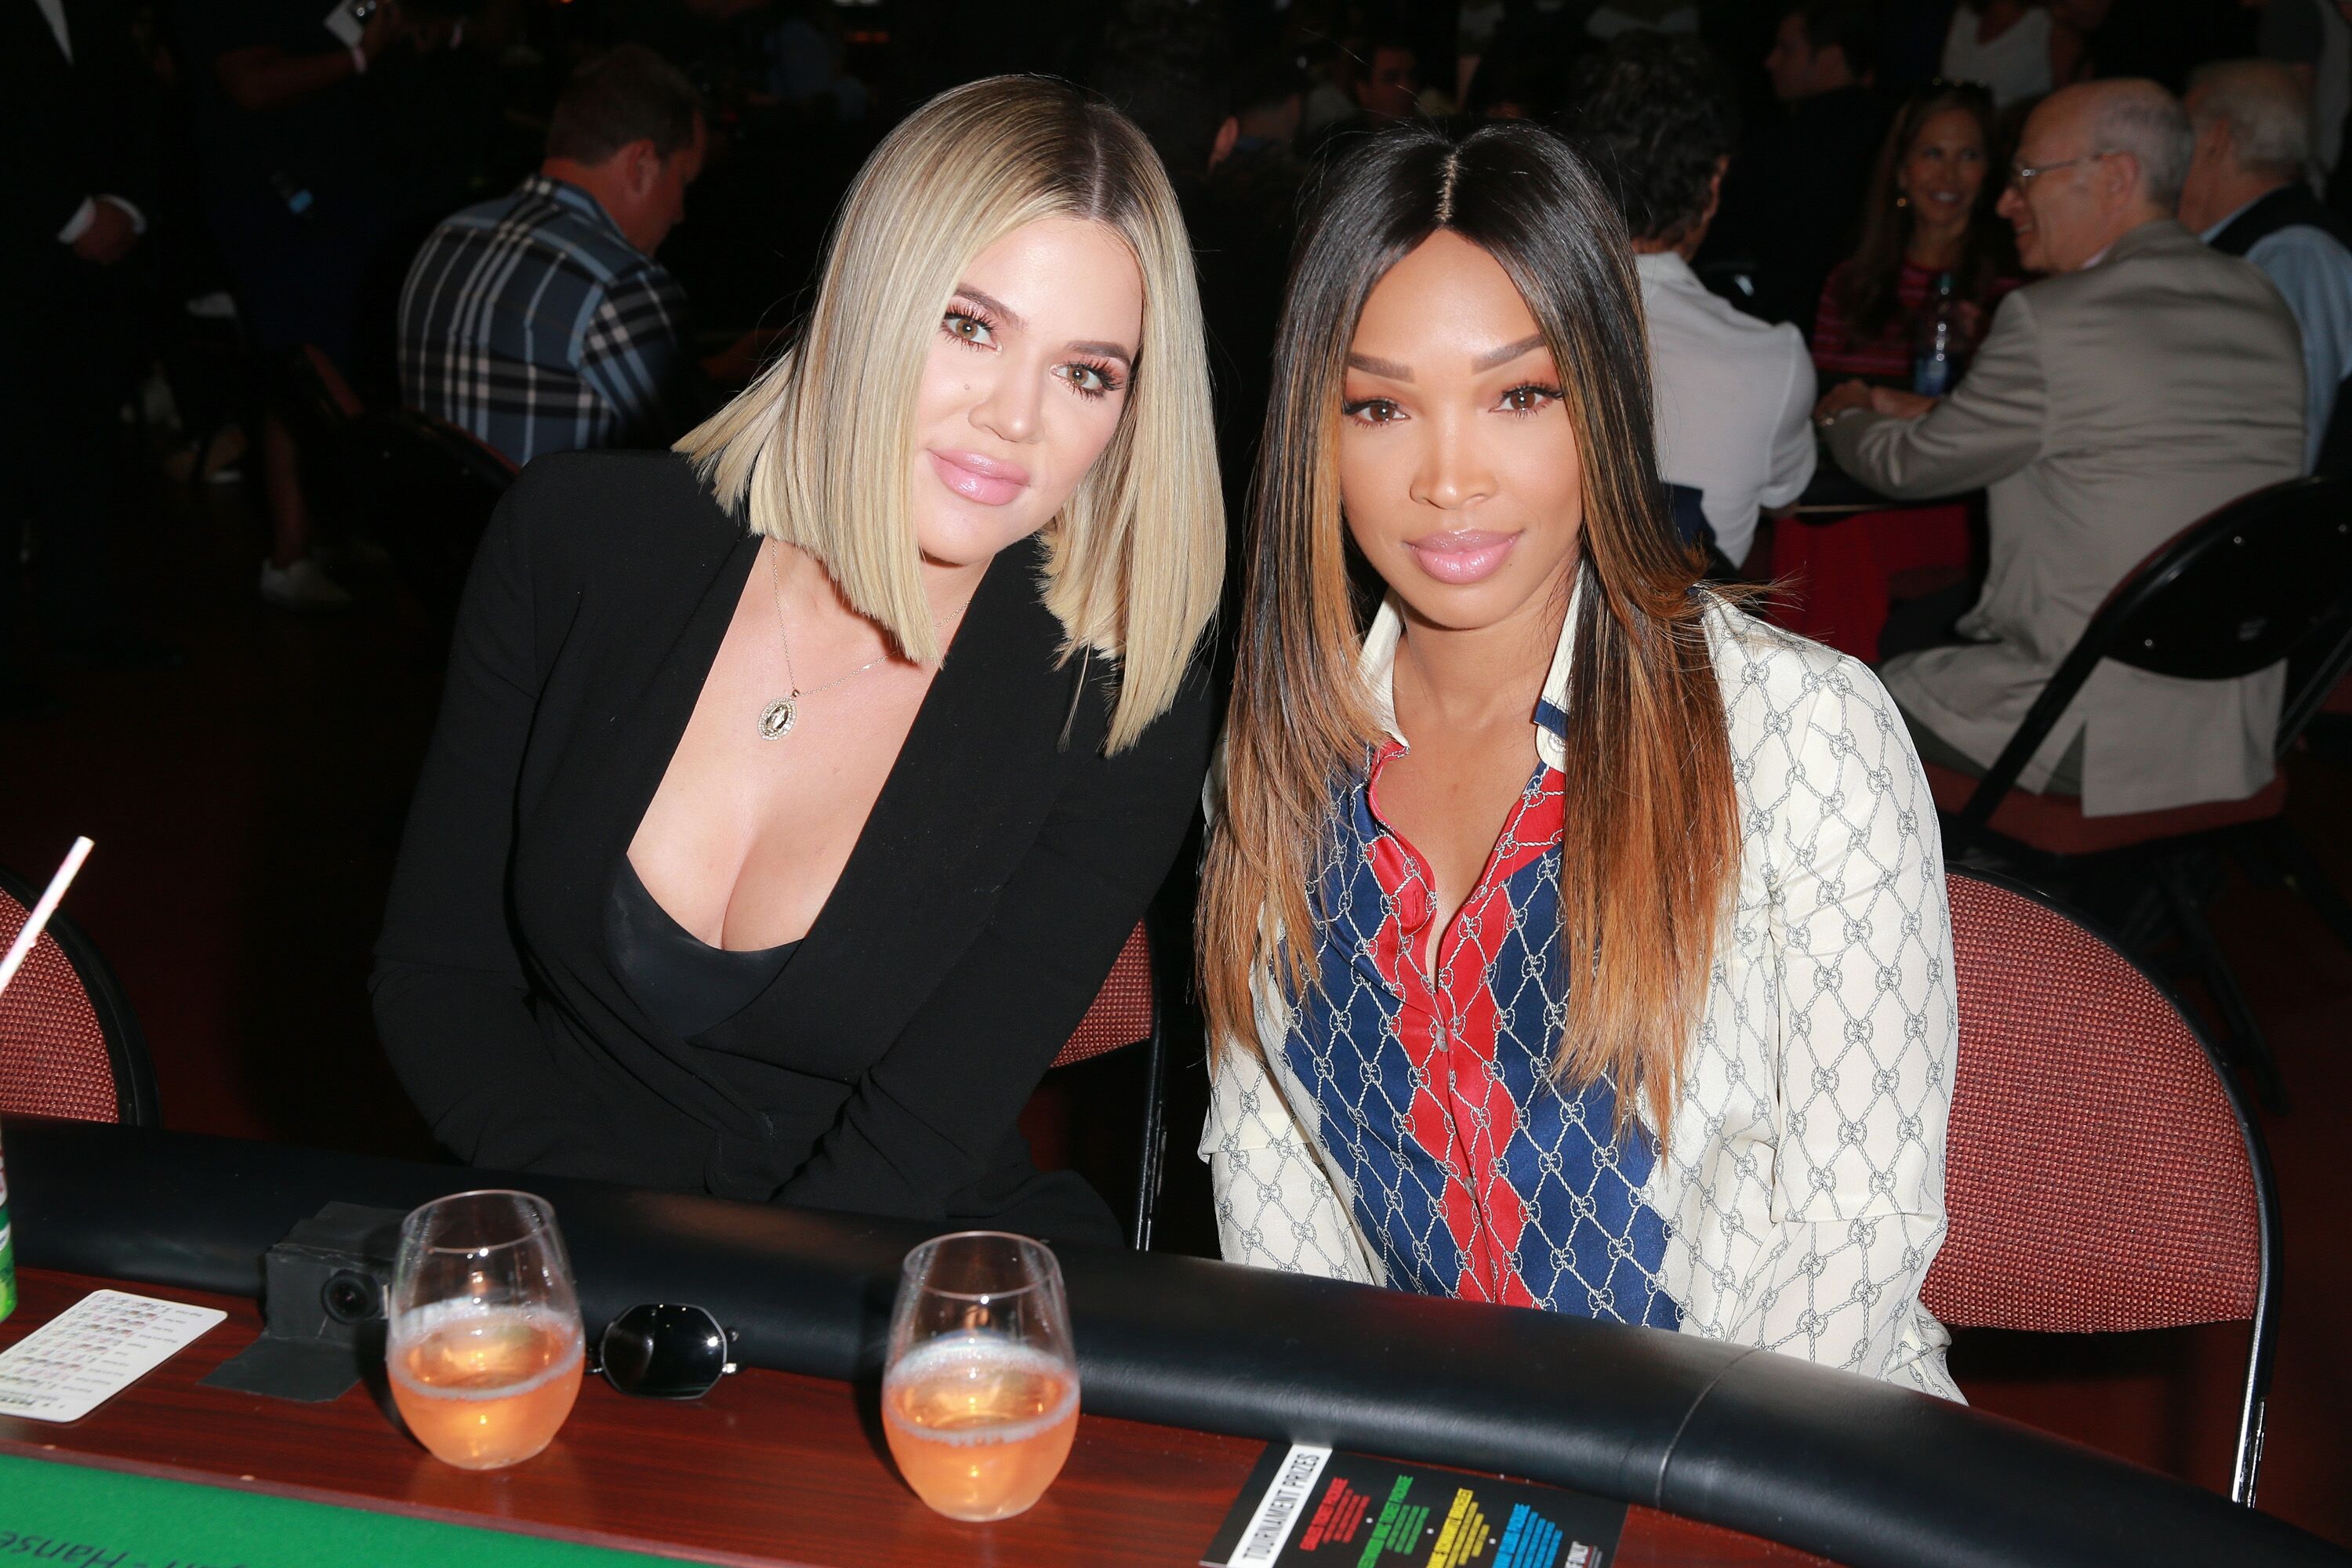 Actress Malika Haqq with her celebrity BFF Khloé Kardashian at a charity poker tournament in 2018/ Source: Getty Images